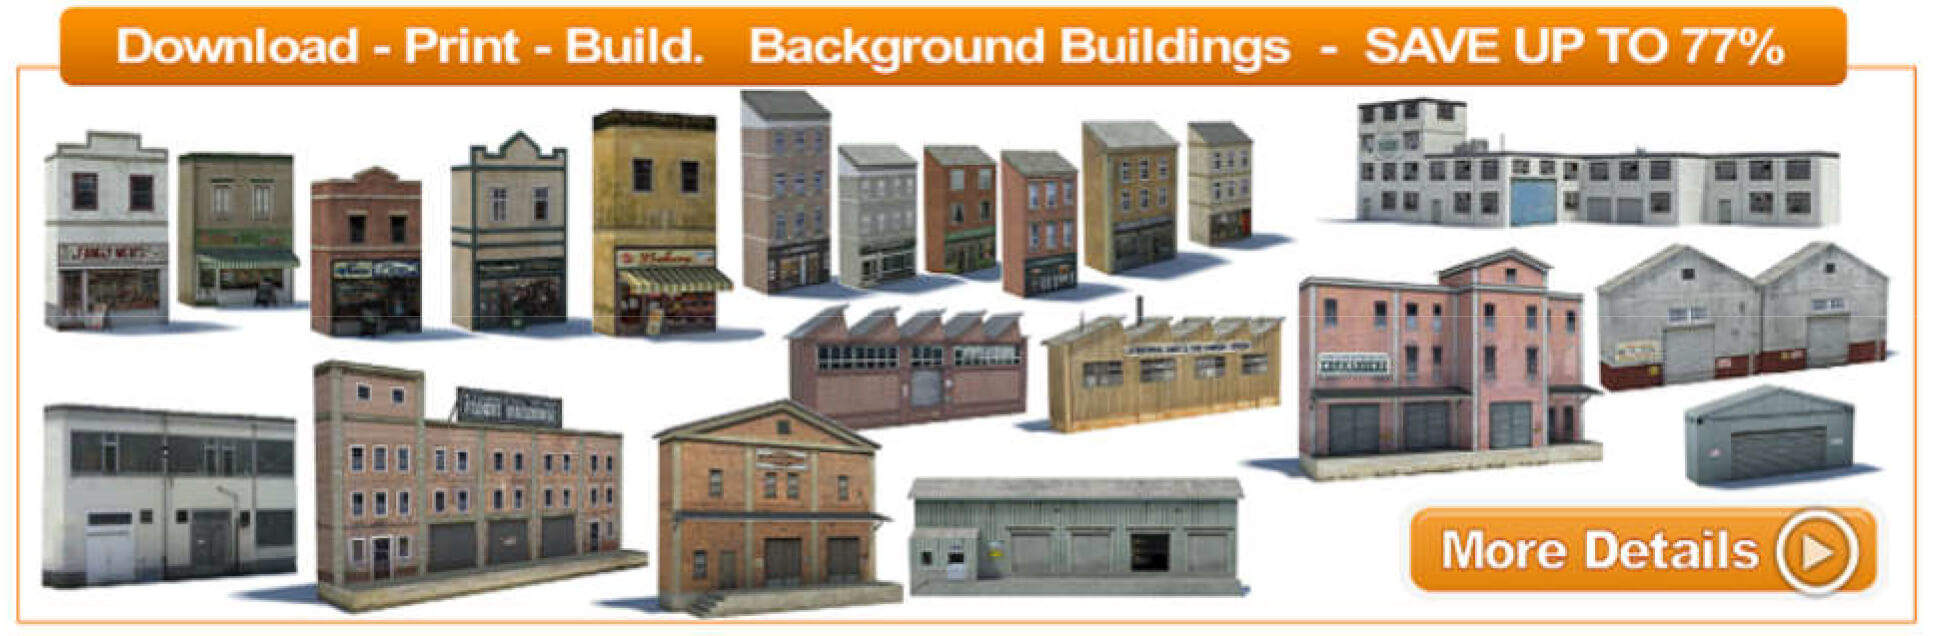 model railroad background buildings and houses